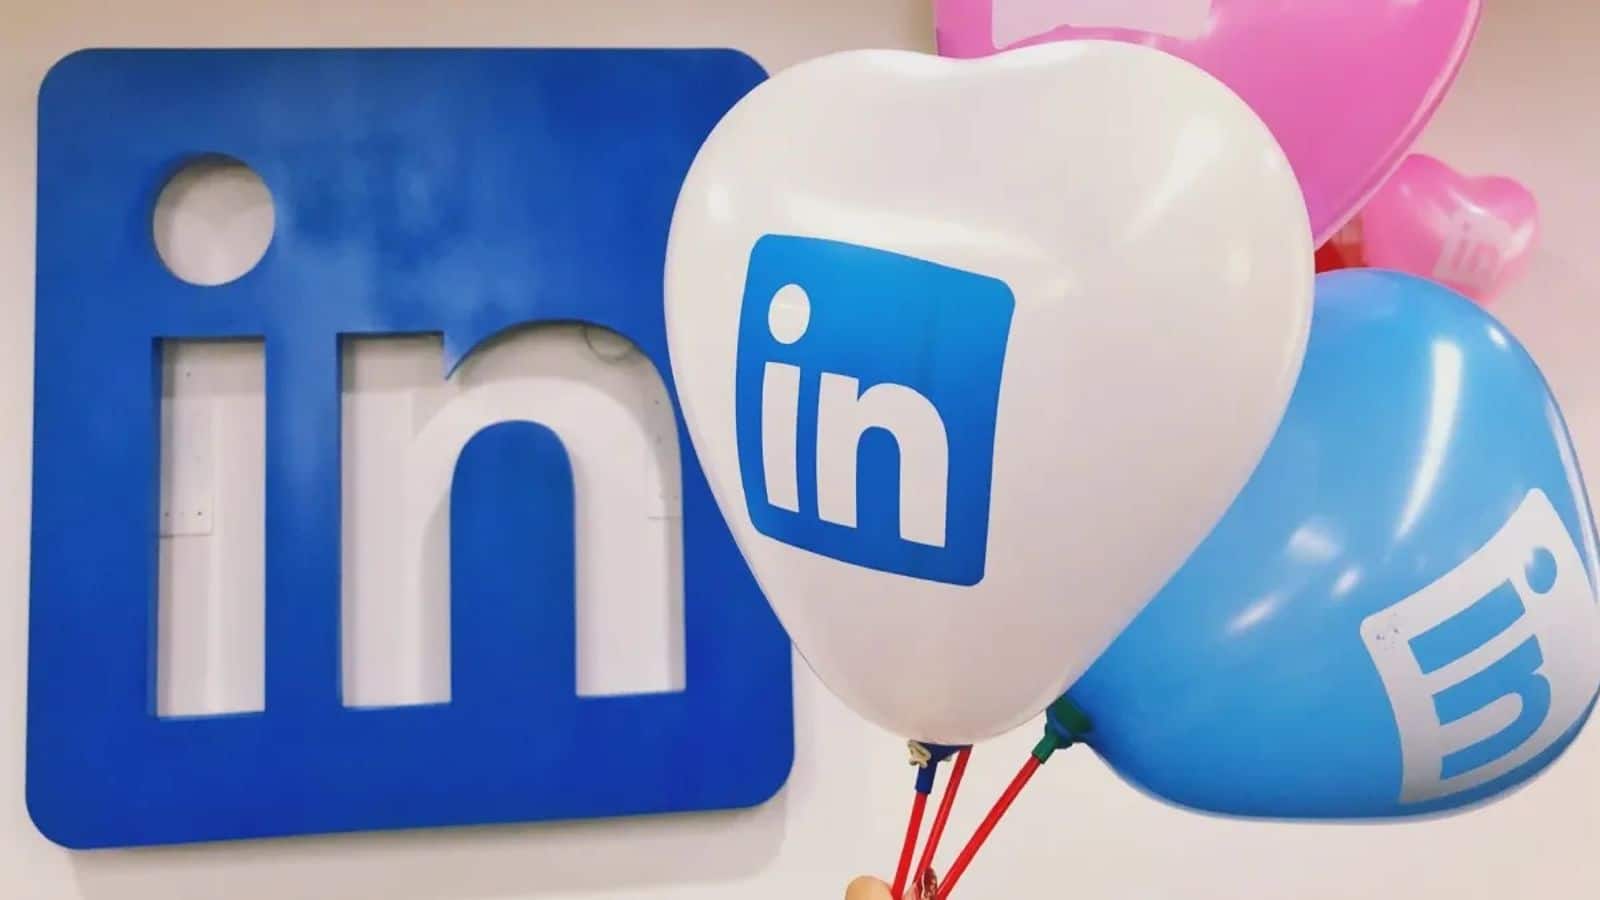 LinkedIn to venture into gaming to boost user engagement